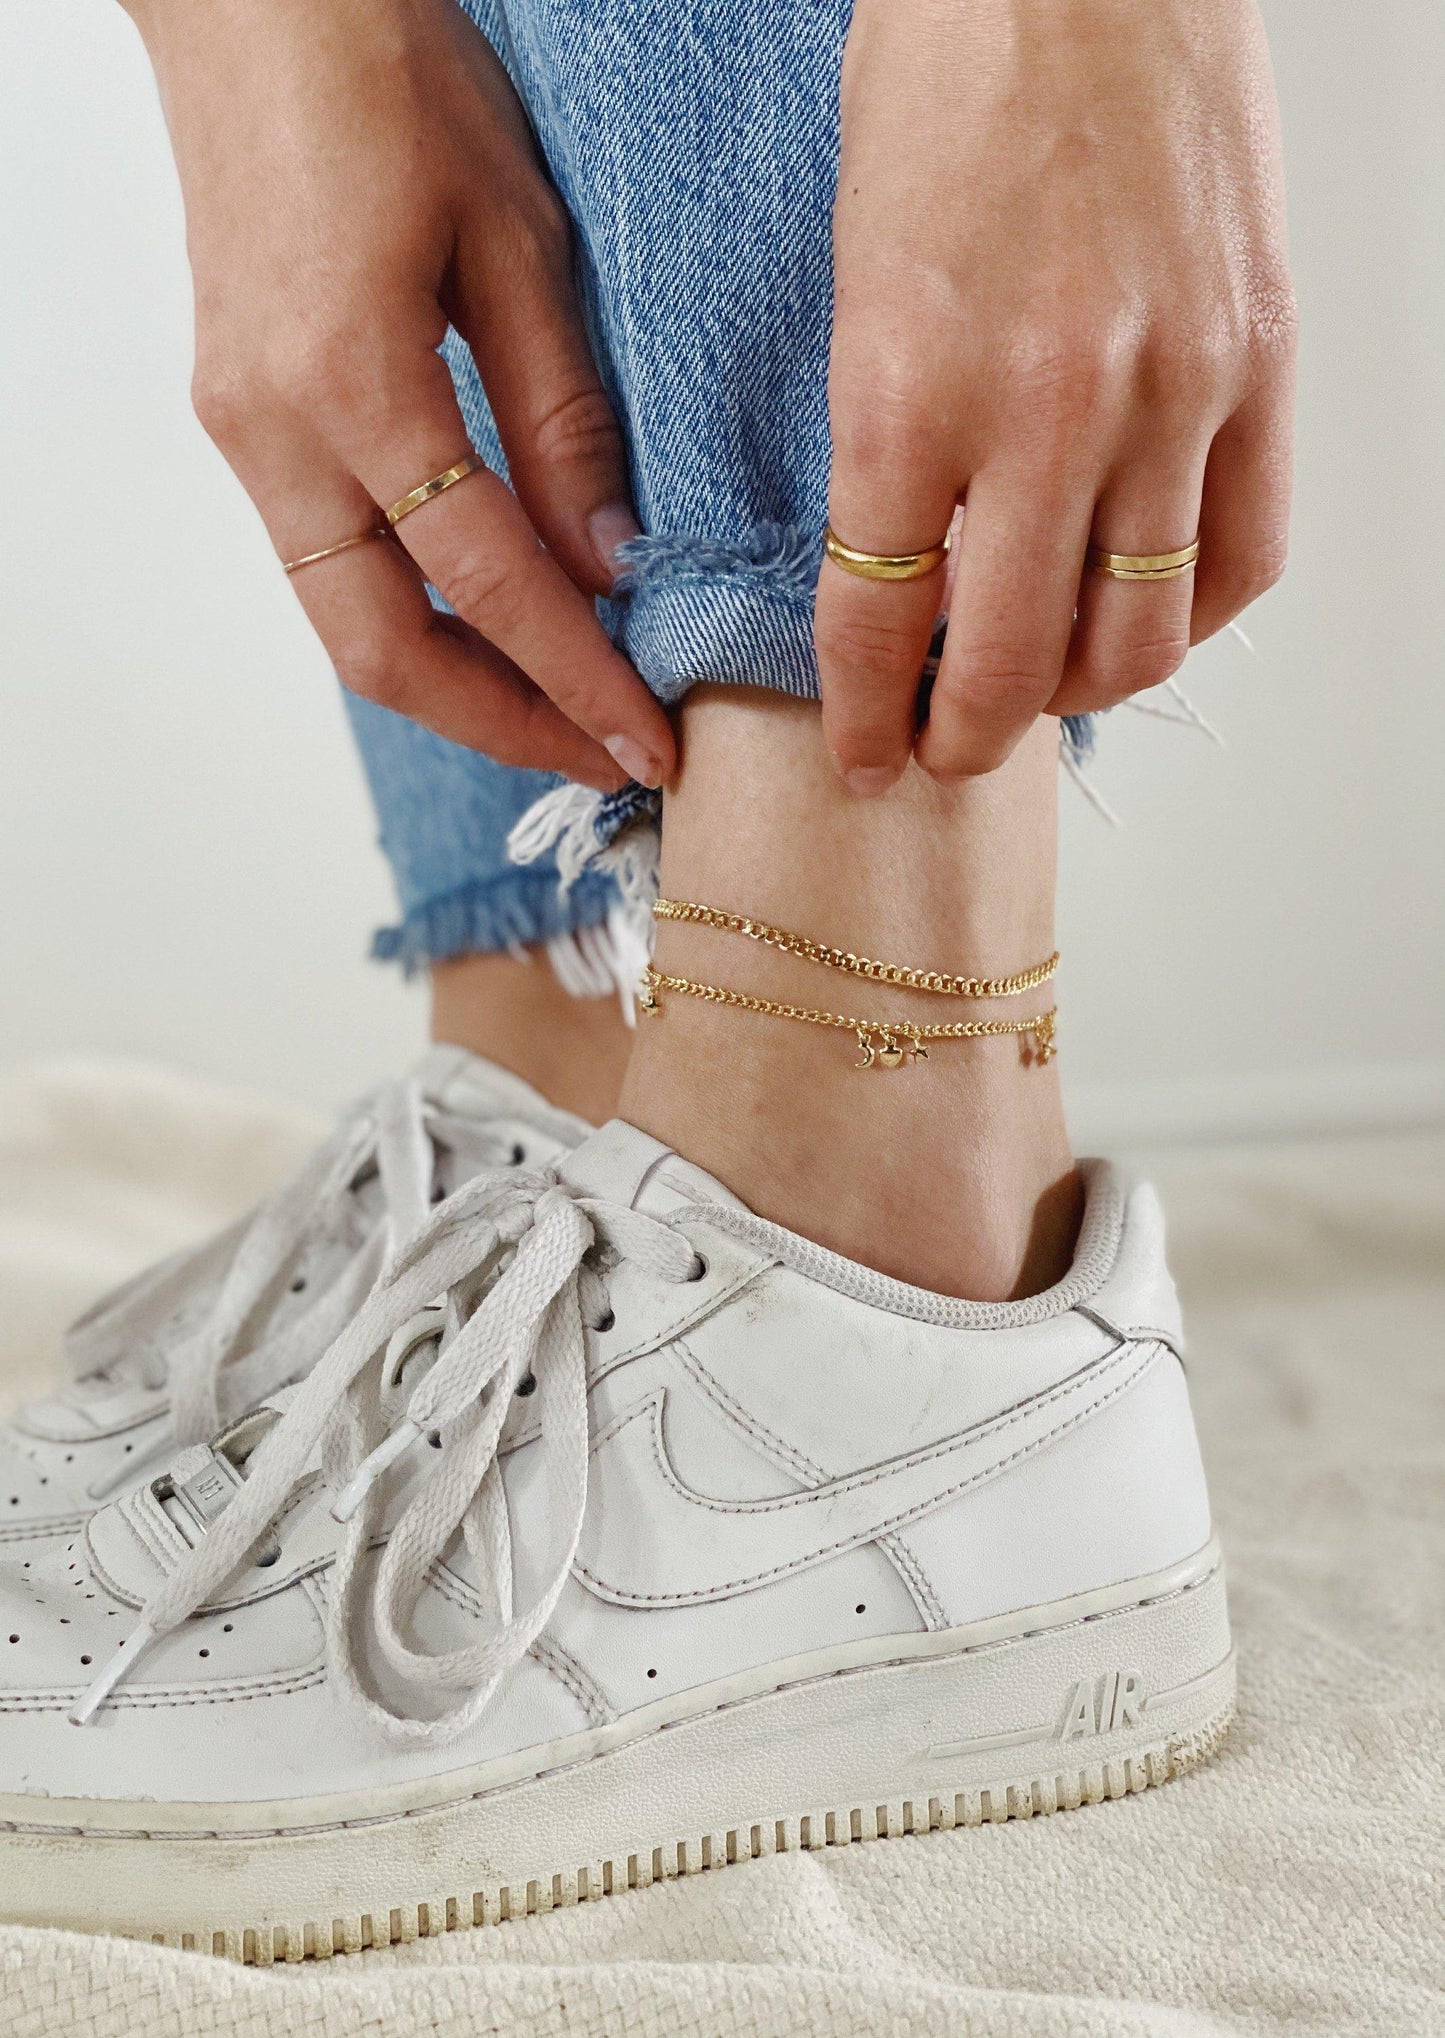 Flat Curb Chain Anklet